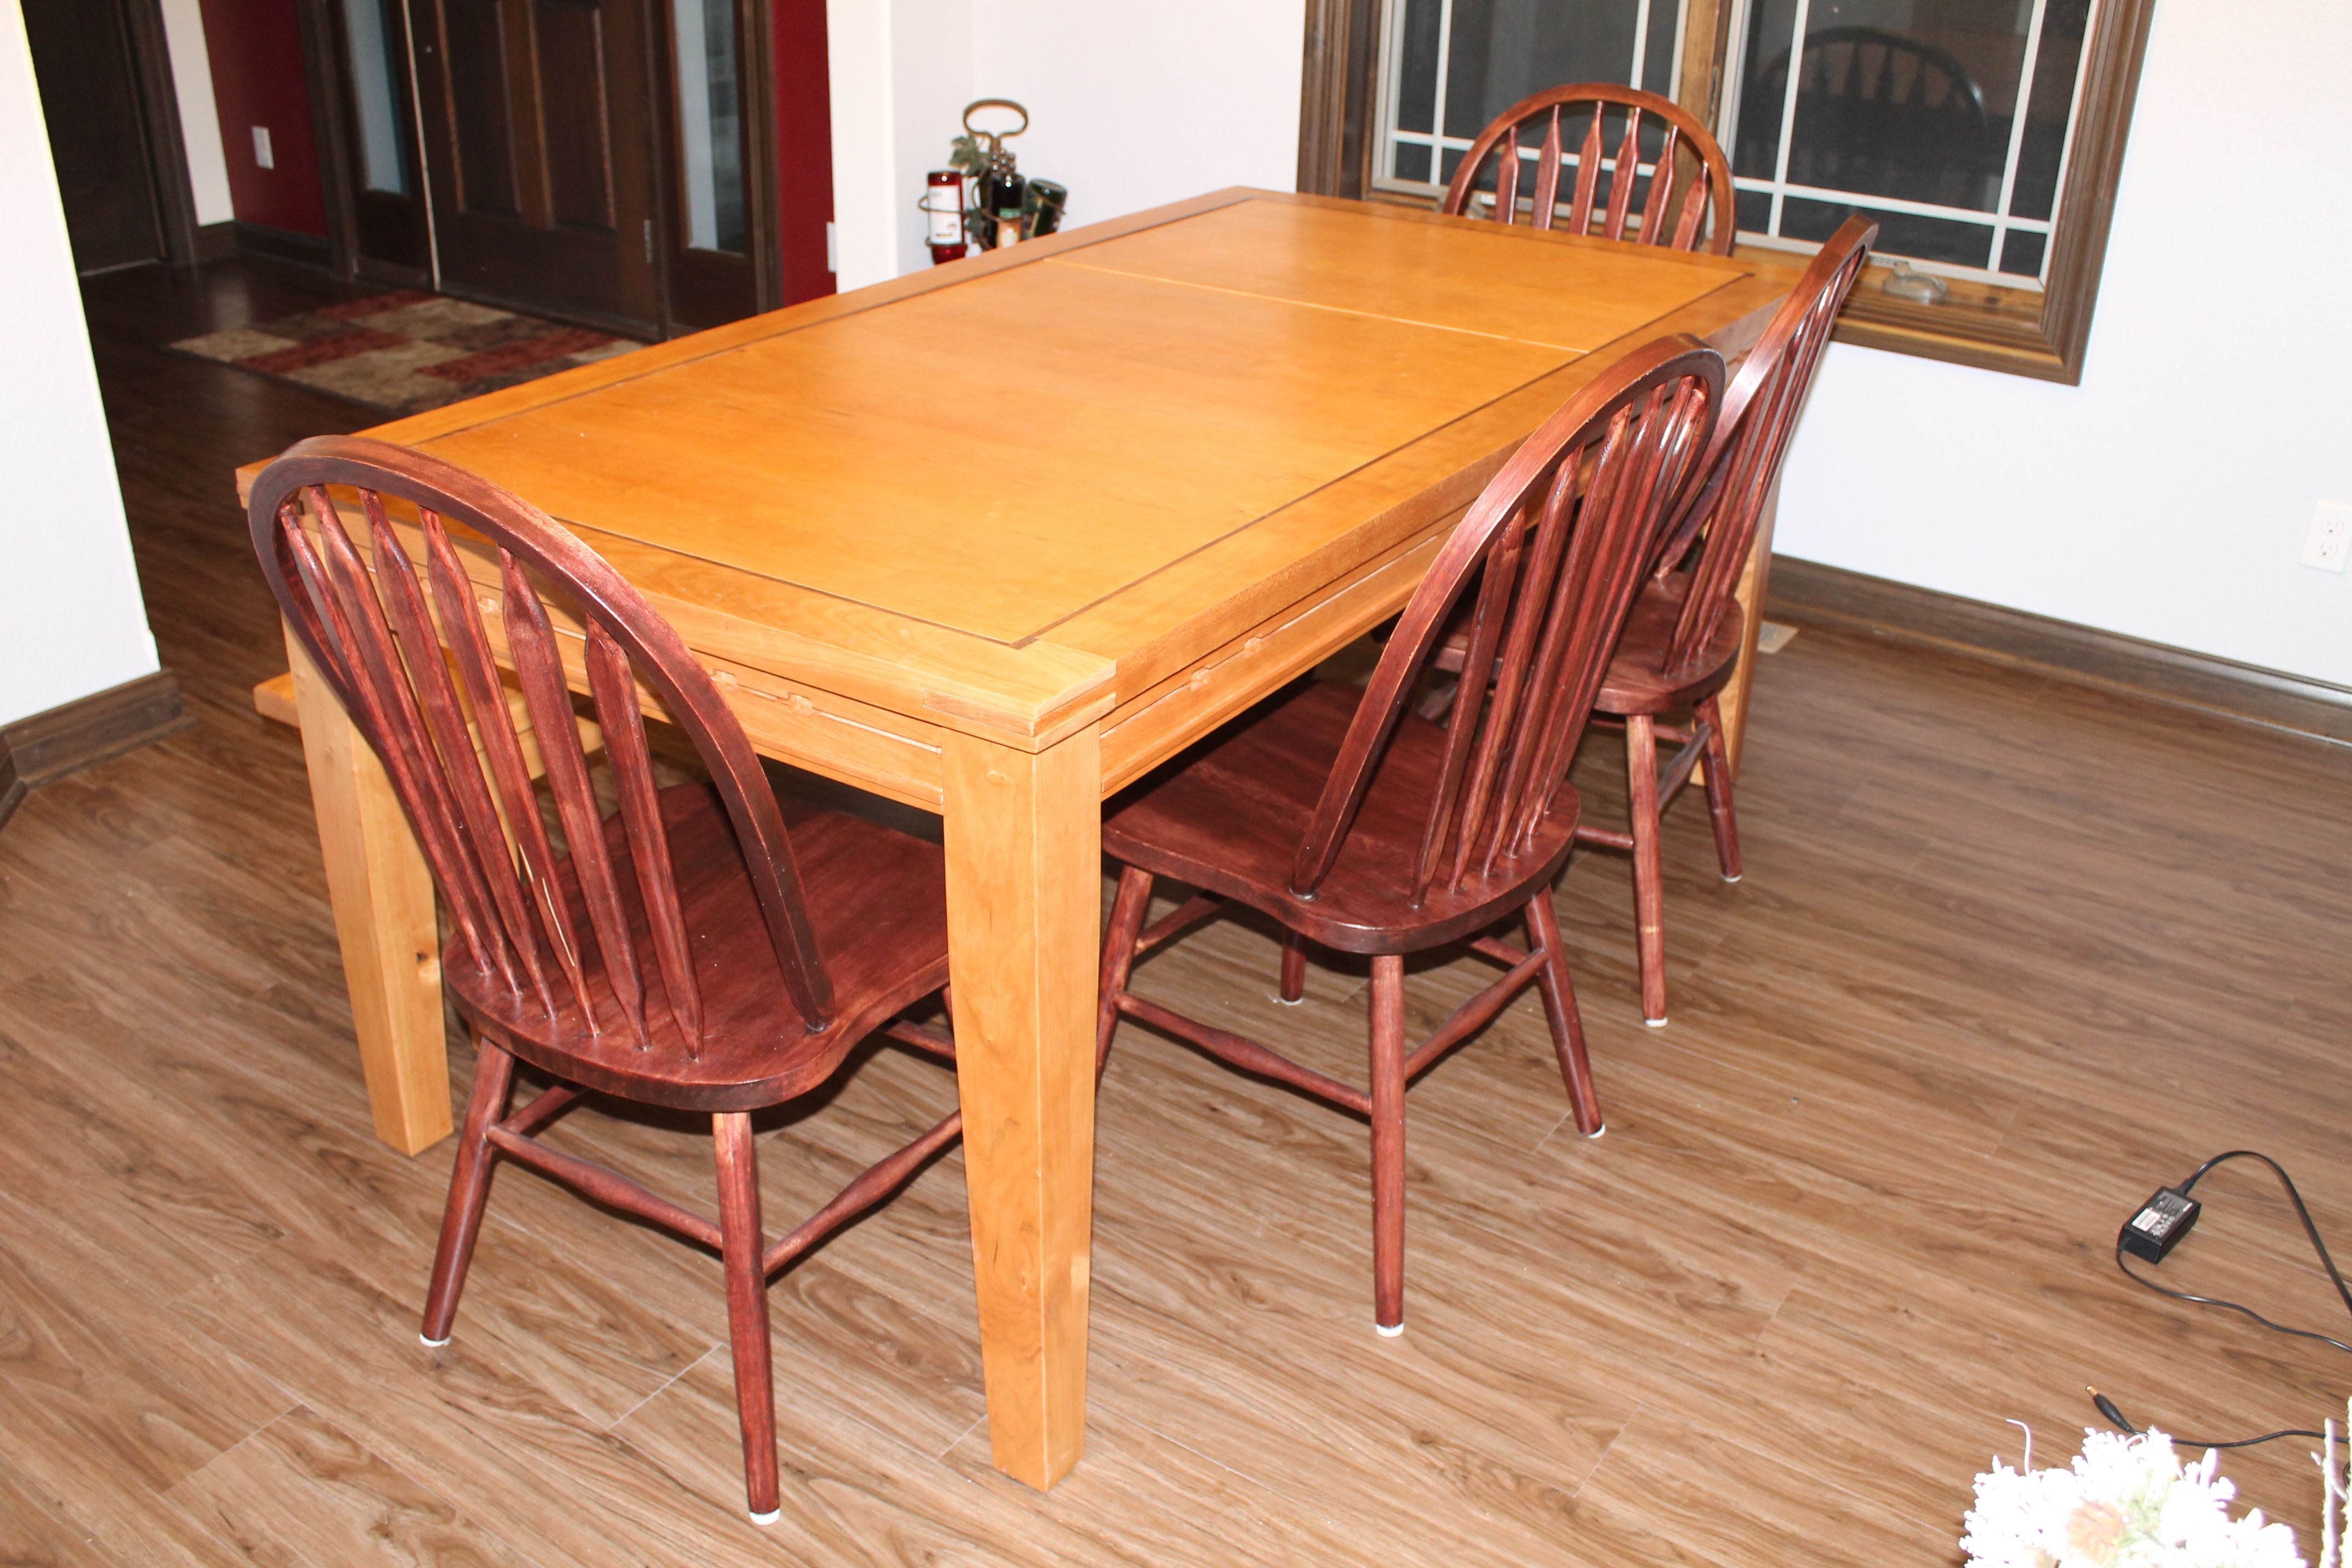 Custom Made Gaming Table / Dining Table by Holtzer Custom Woodworking